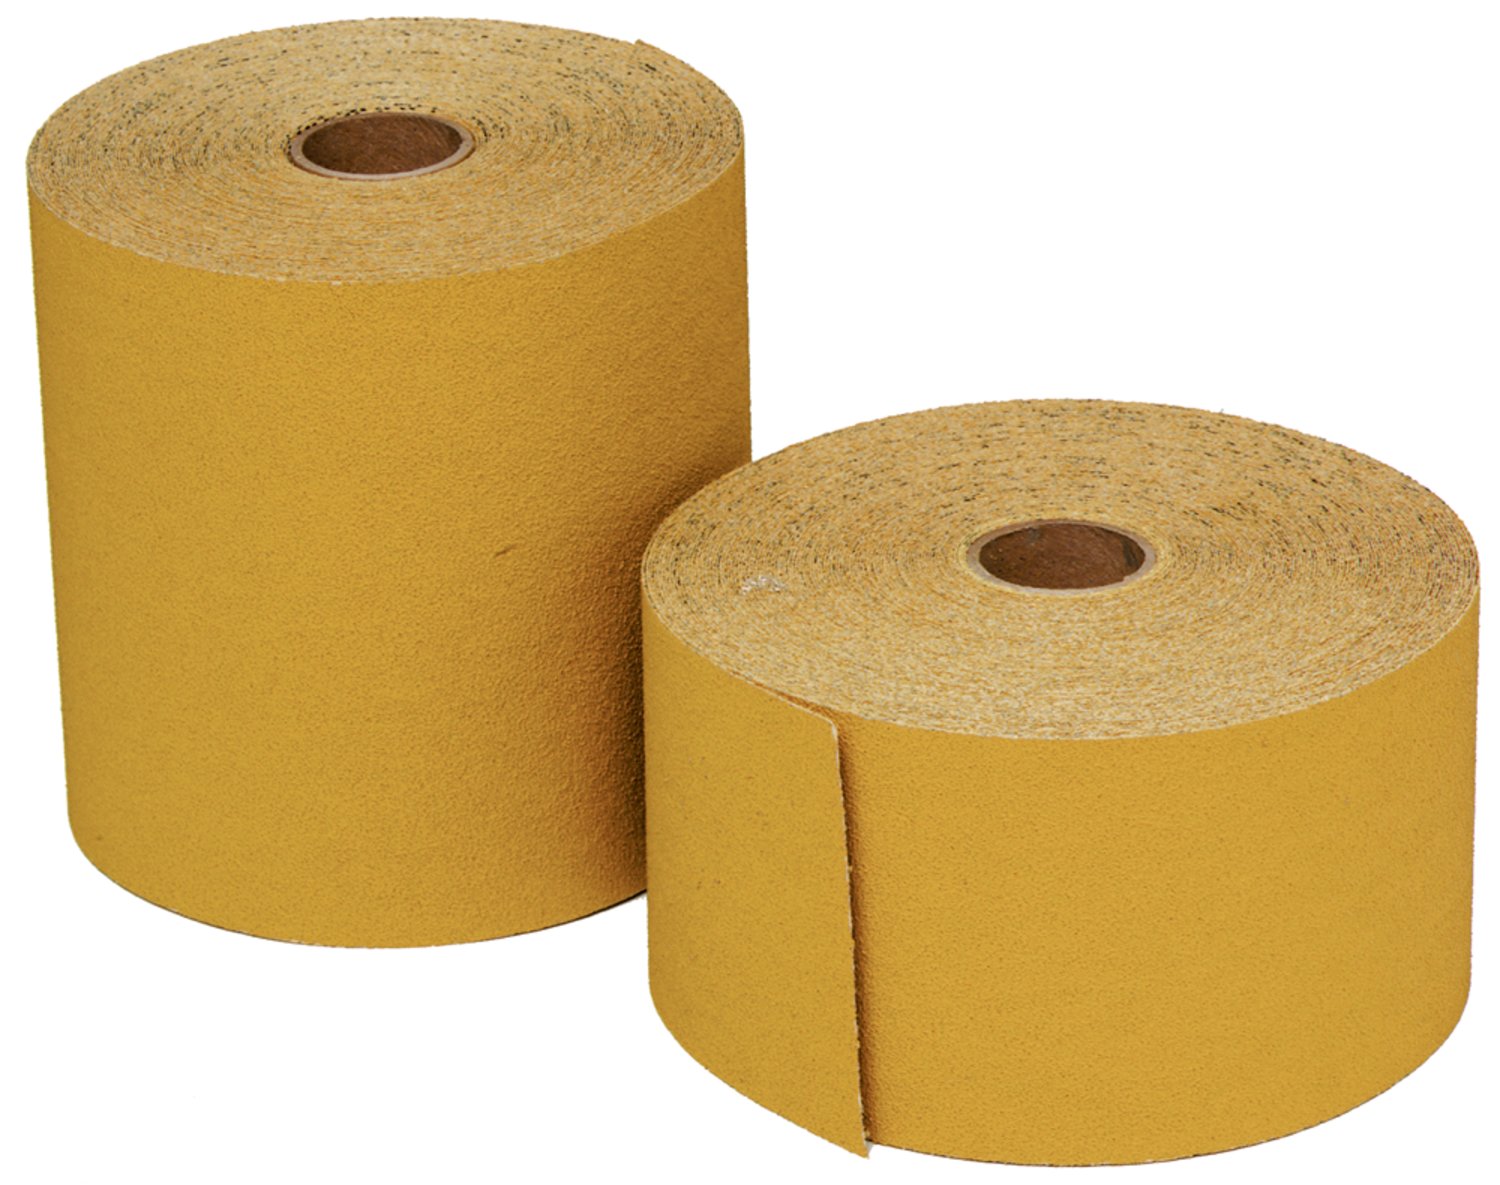 7100111130 - 3M Stikit Gold Paper Roll 216U, P180 A-weight, Config